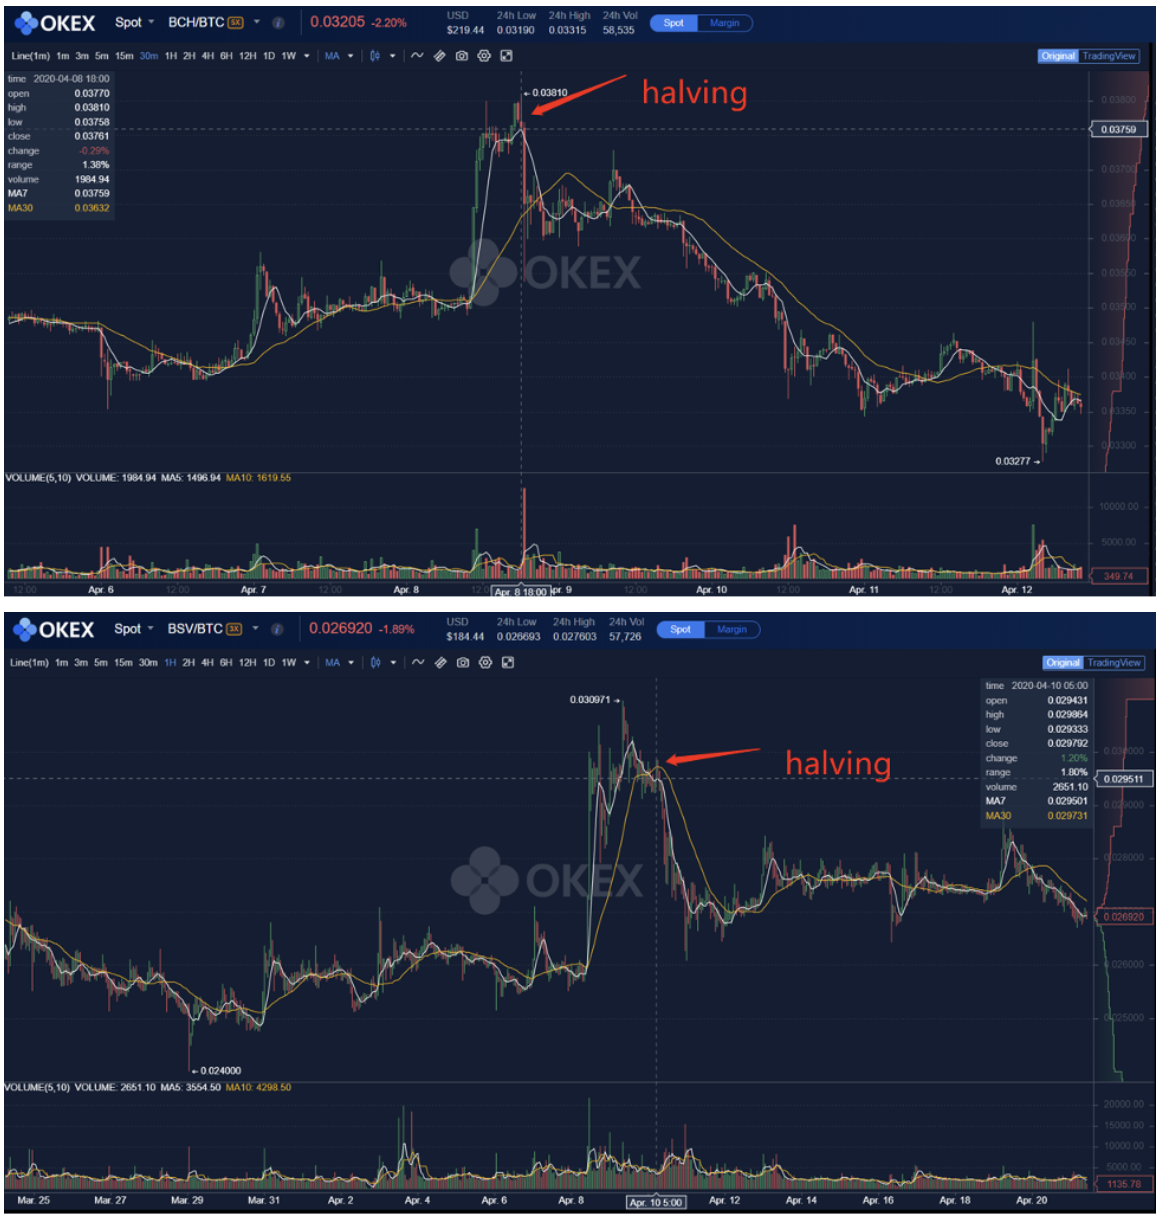 Bitcoin Cash and Bitcoin SV Price Action Around Their Halving. (Source: OKEx)